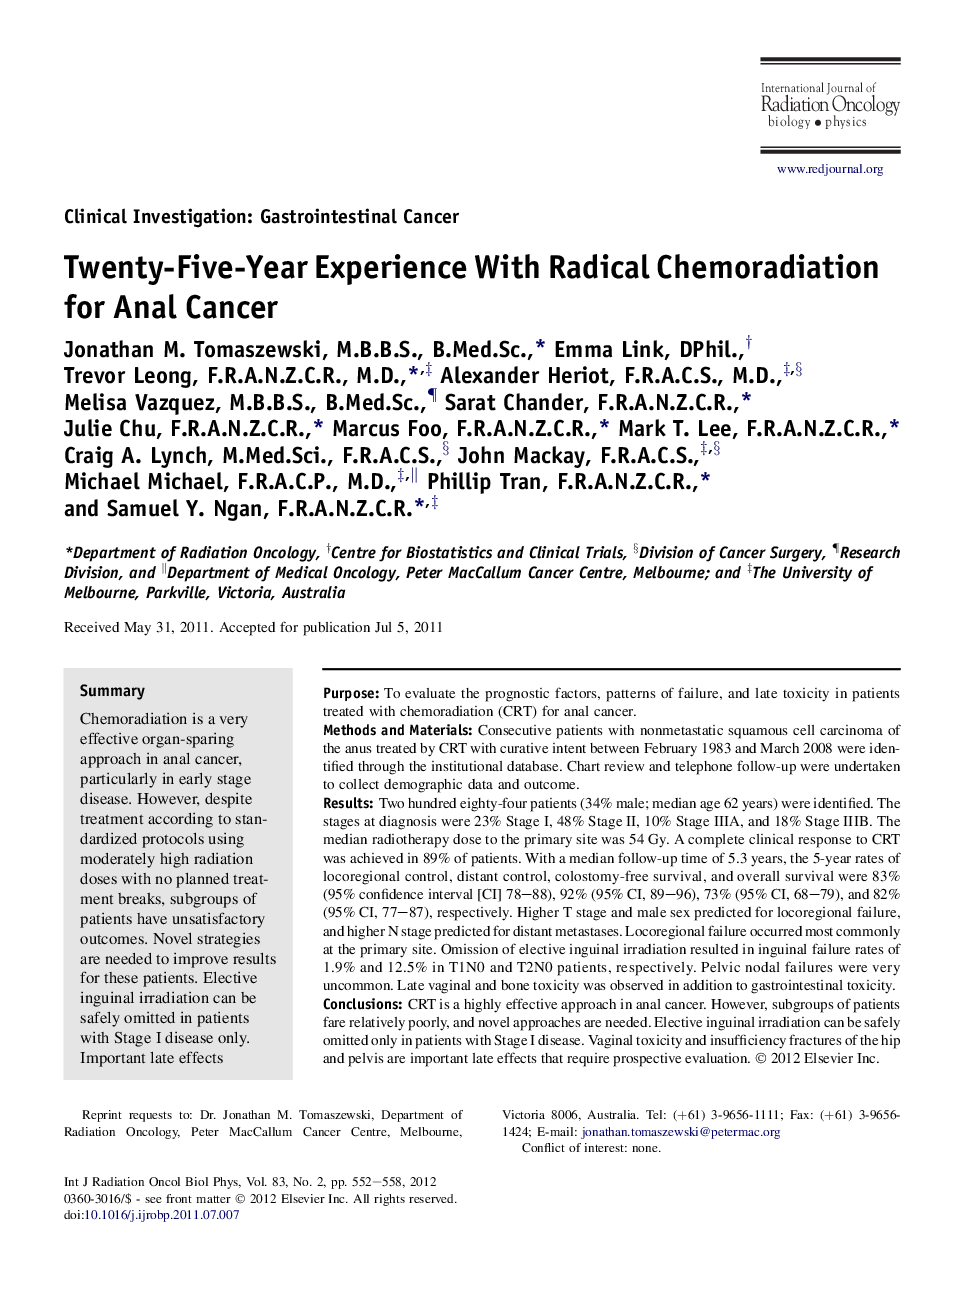 Twenty-Five-Year Experience With Radical Chemoradiation for Anal Cancer